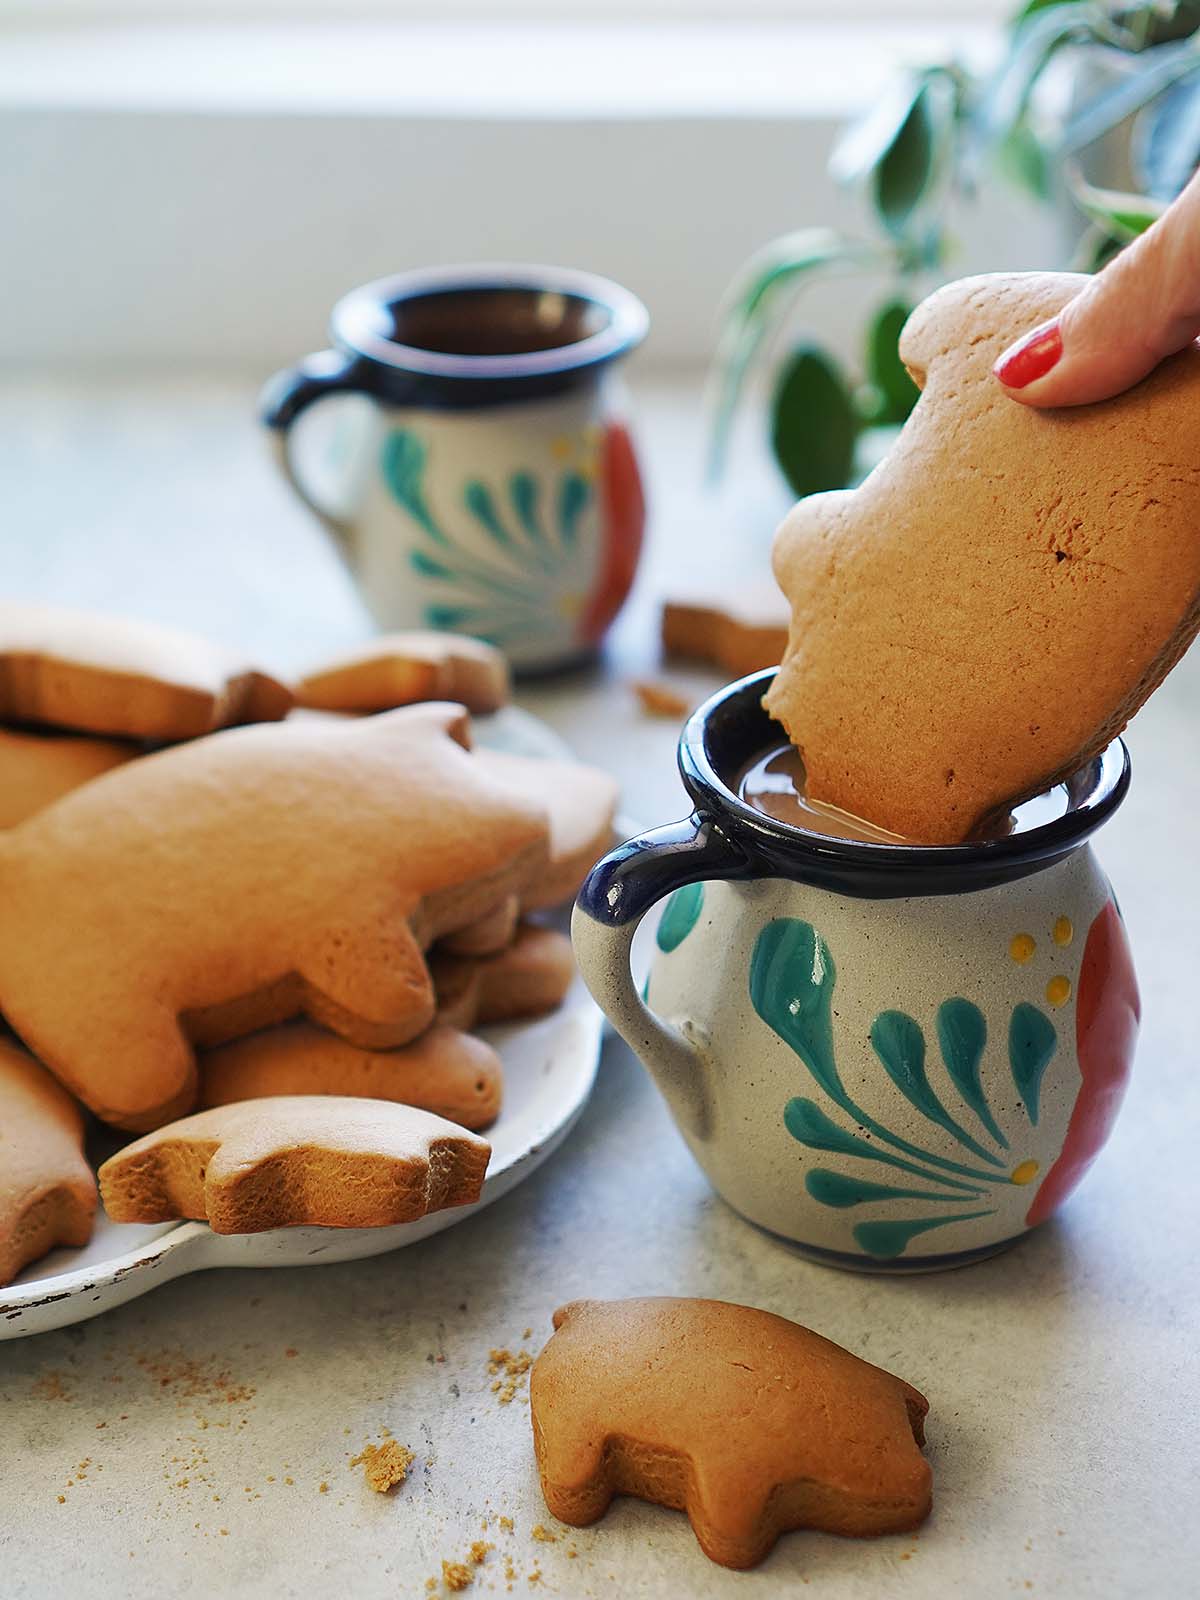 Pig cookies being dipped in a mug with coffee.